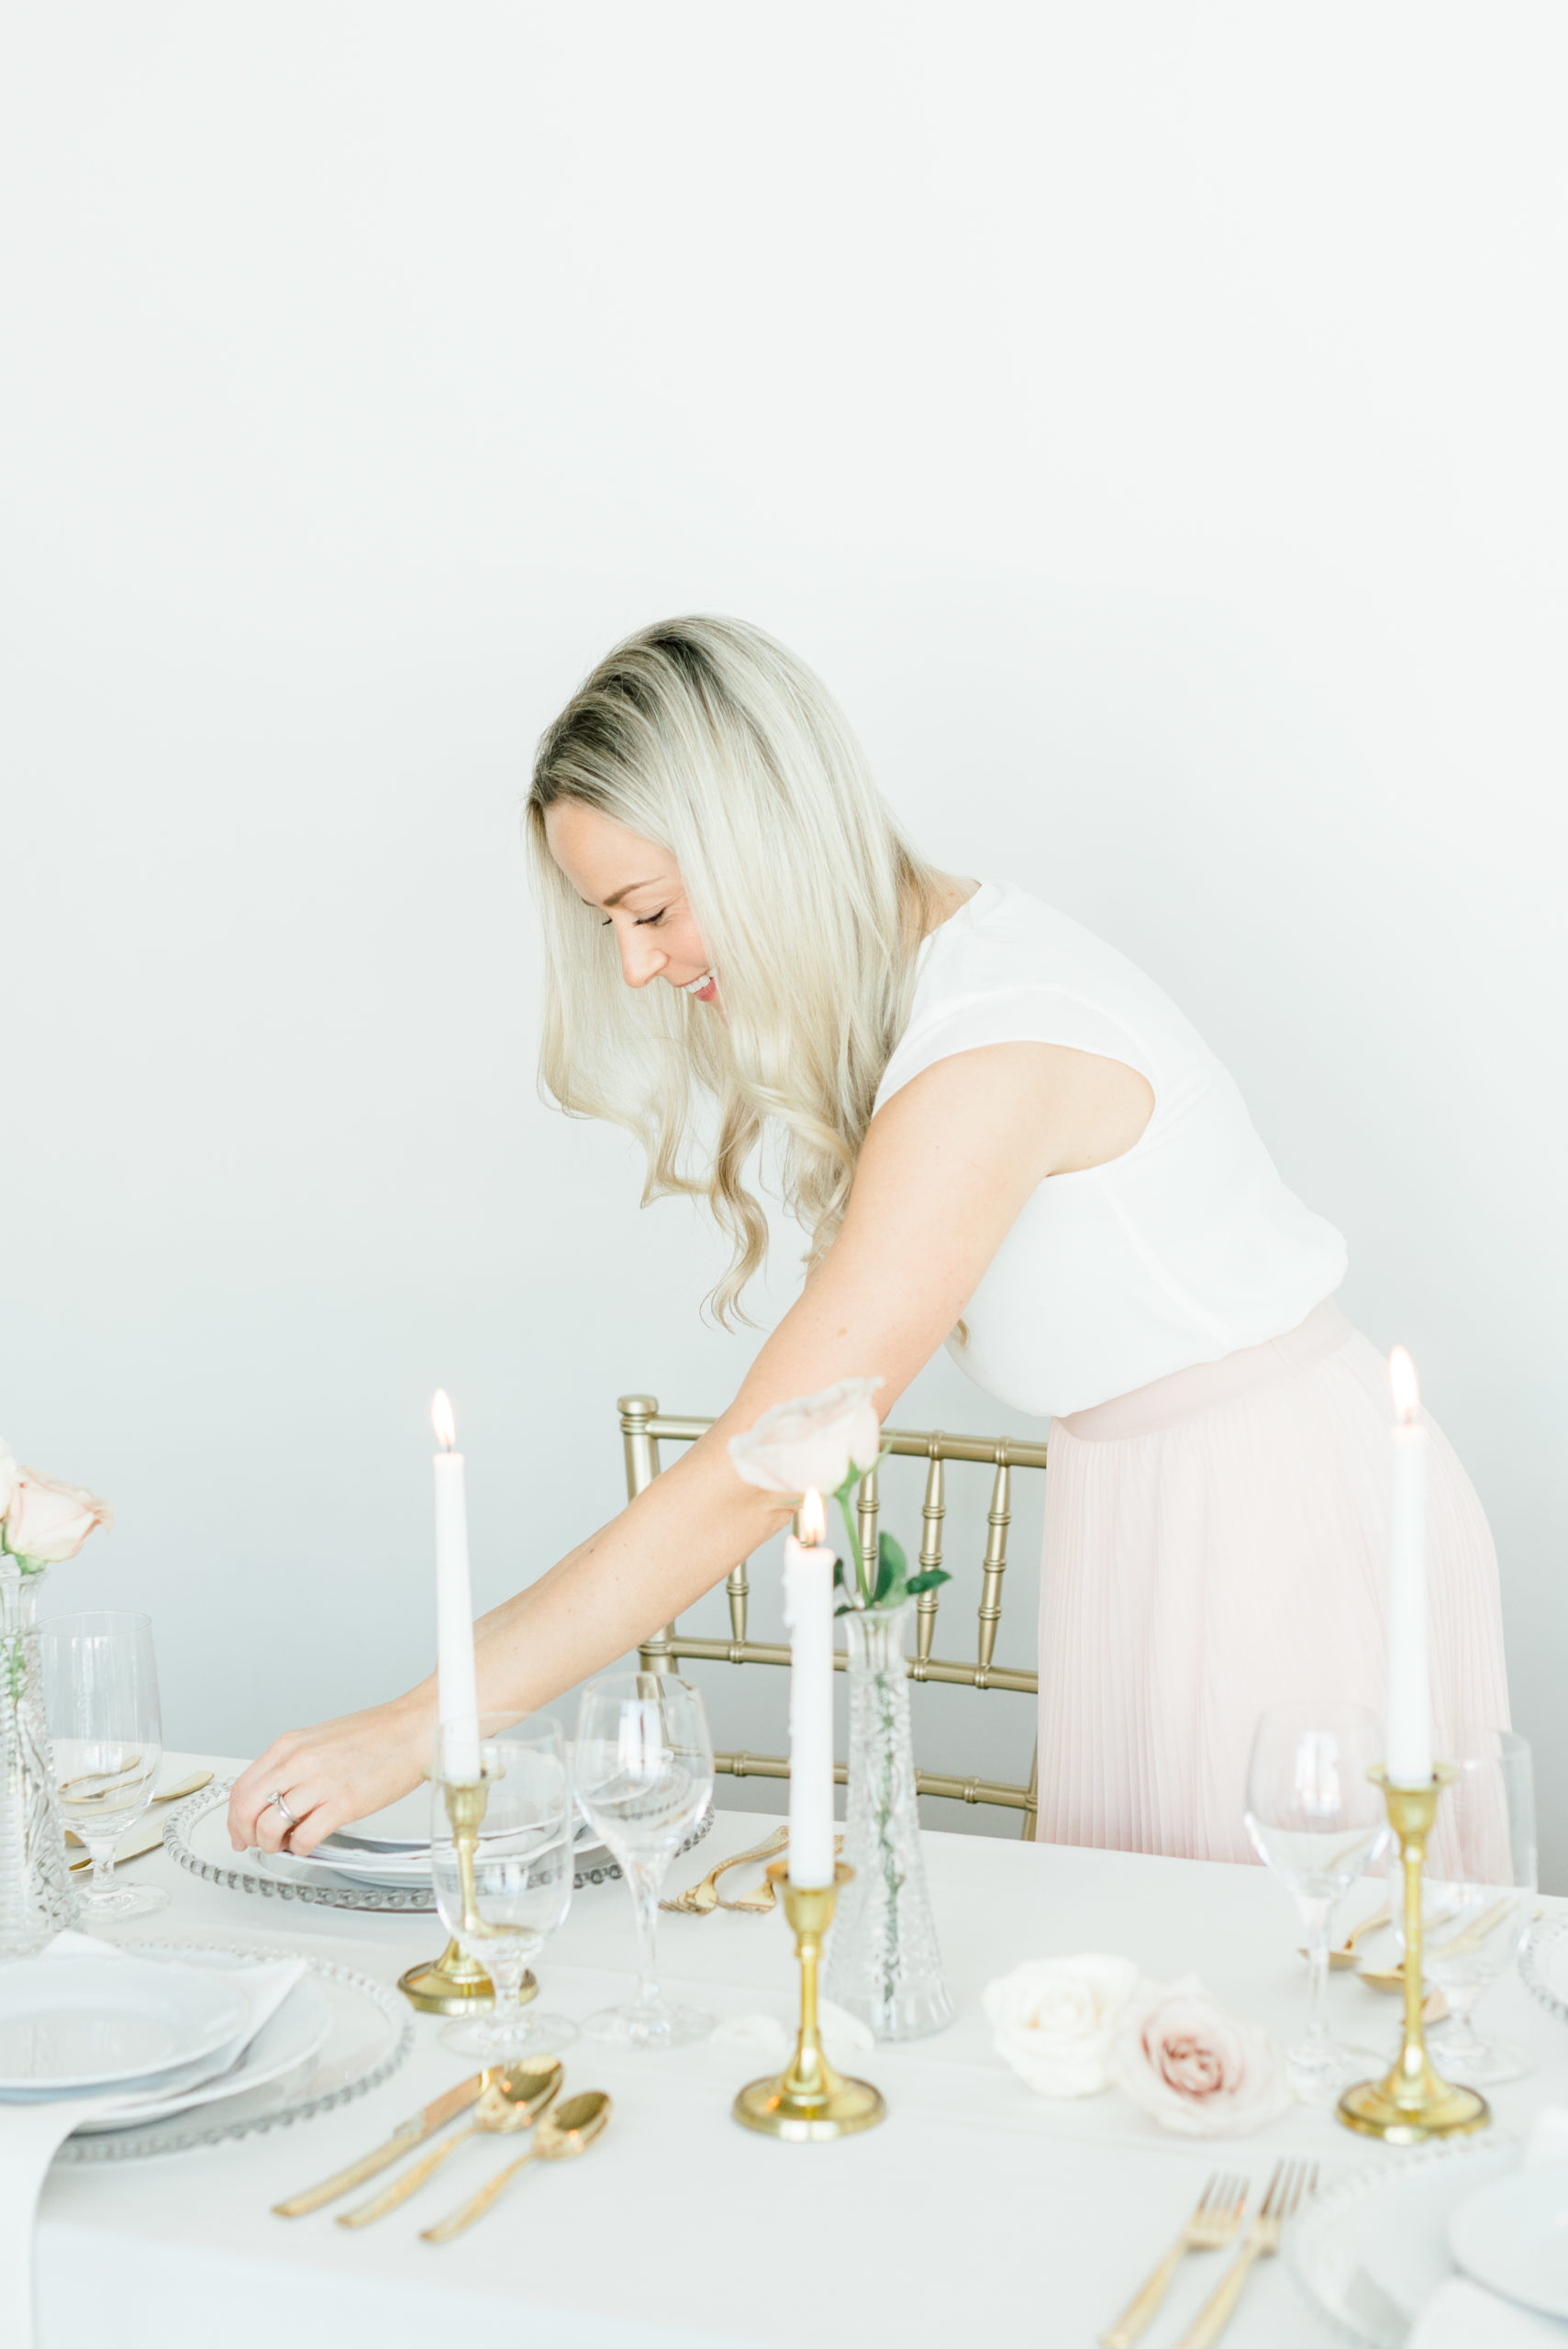 Thunder Bay wedding planner adjusting a plate on a table set with gold candles and gold cutlery